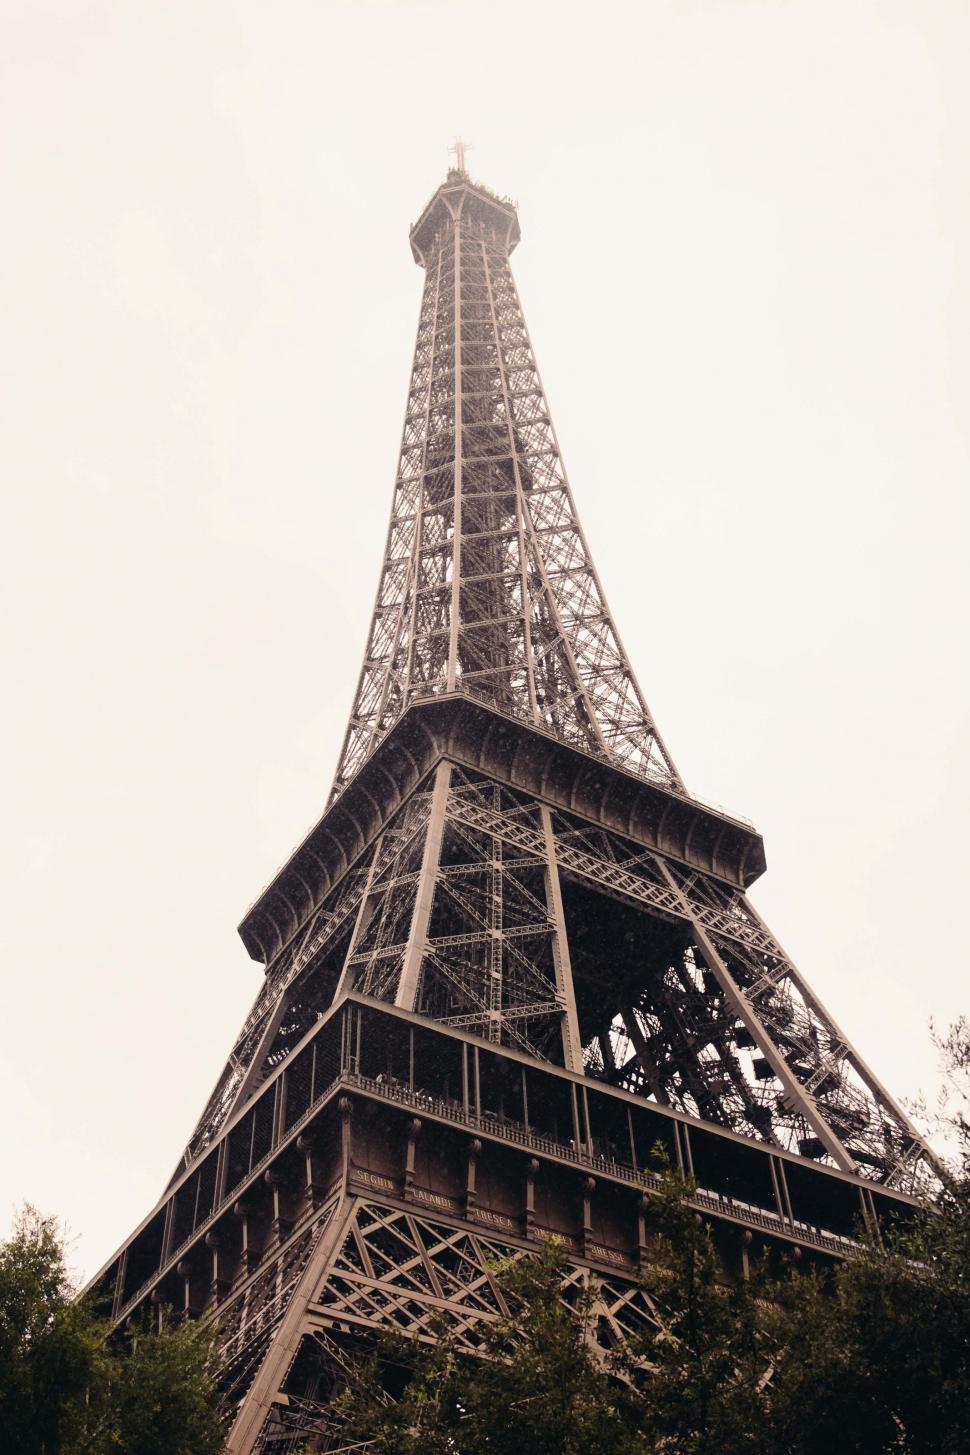 Download Free Stock Photo of A side view from Eiffel tower s base 